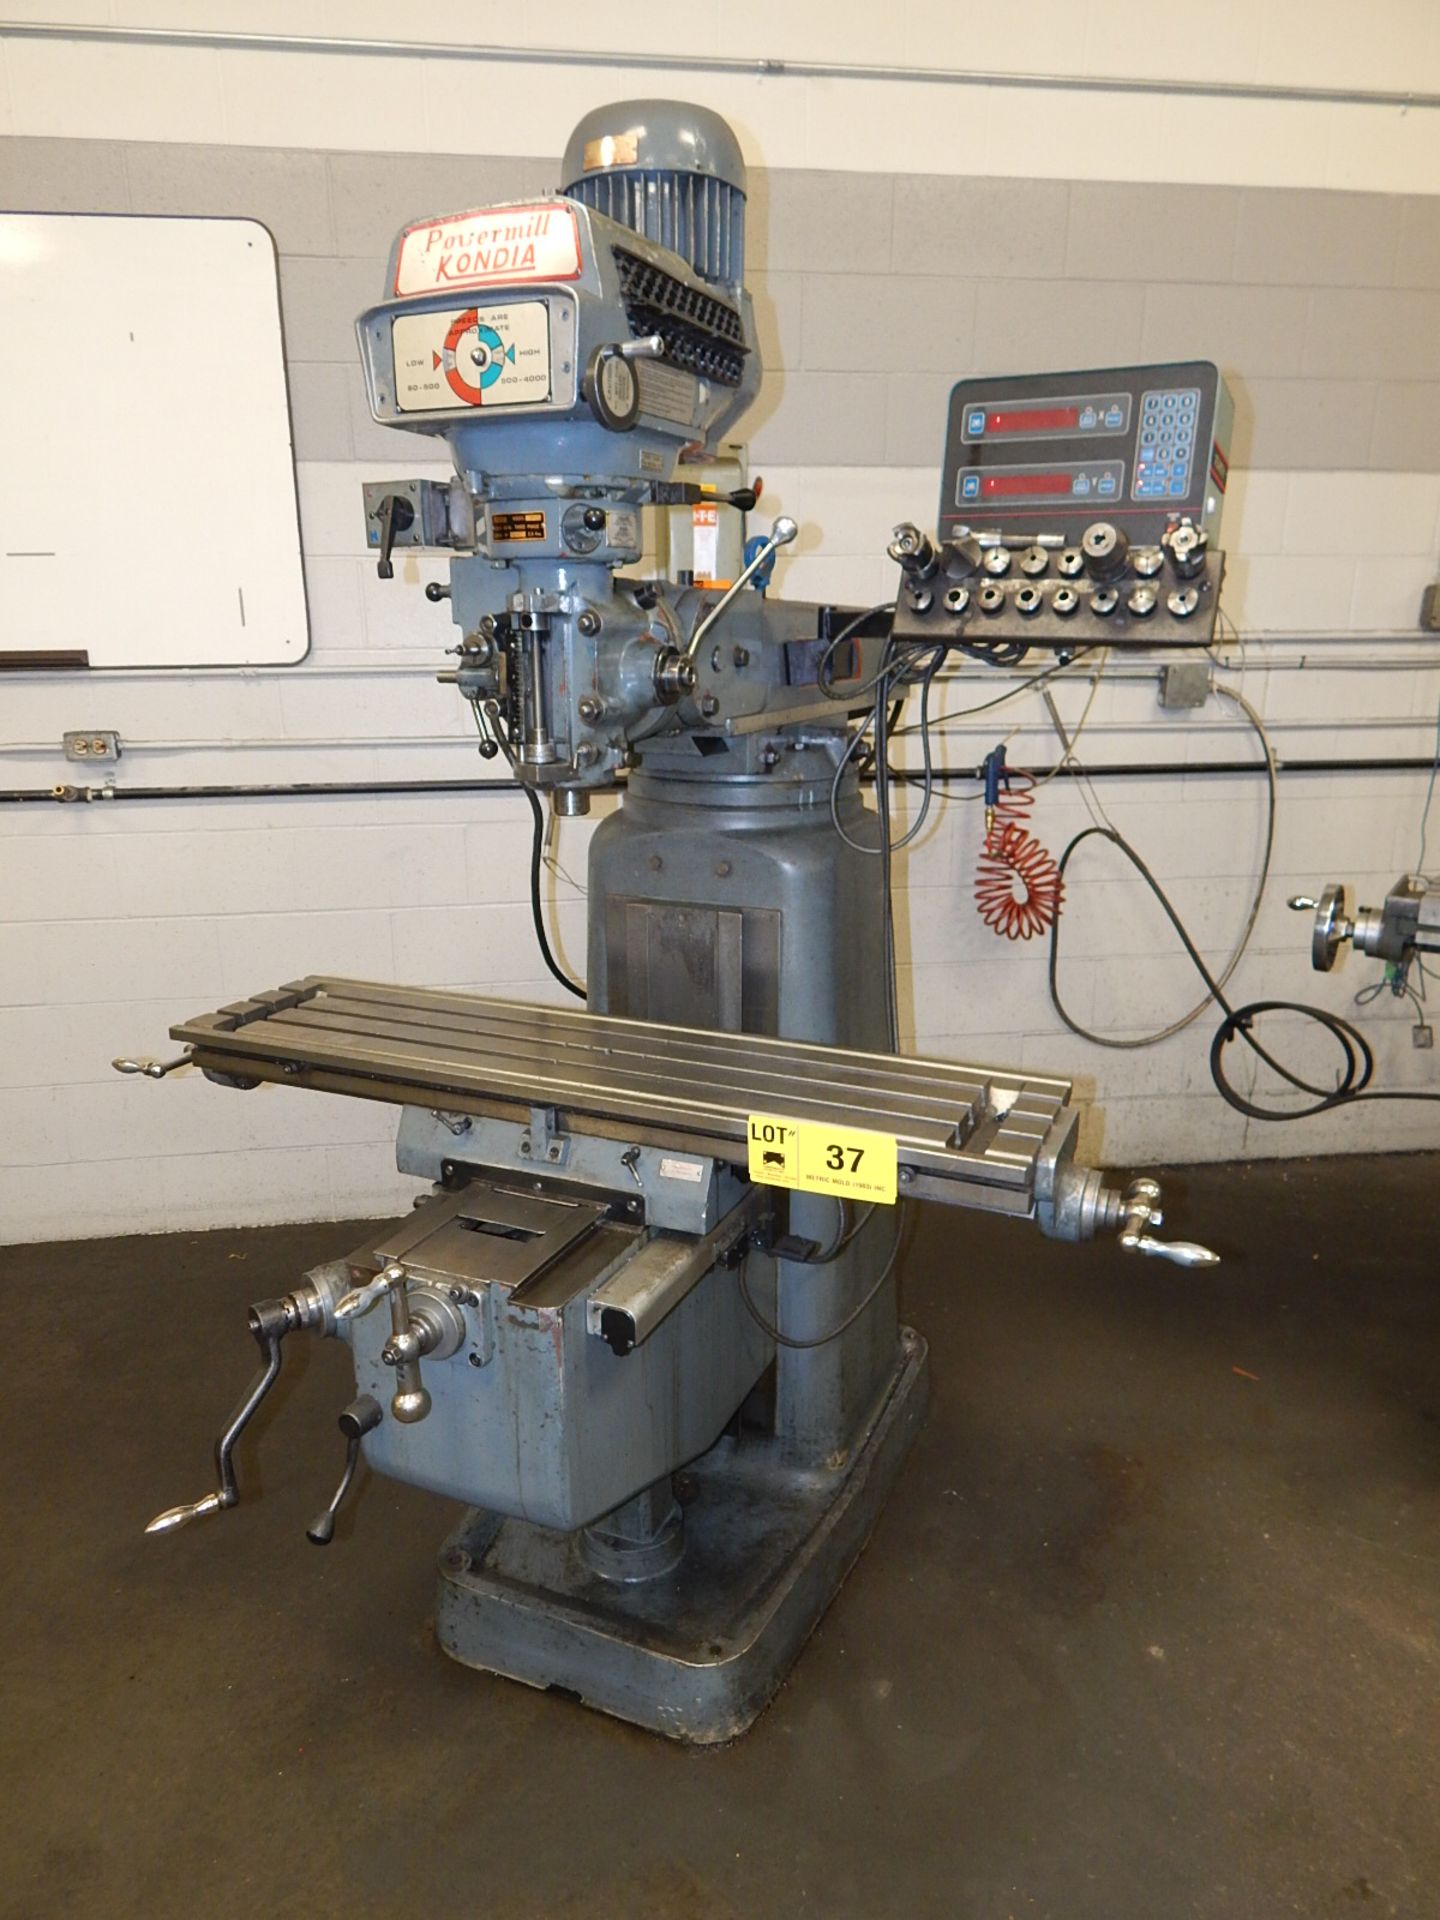 KONDIA FV-1 VERTICAL TURRET MILL WITH 48"X12" TABLE, SPEEDS TO 4000 RPM, ACCURITE III 2 AXIS DRO,